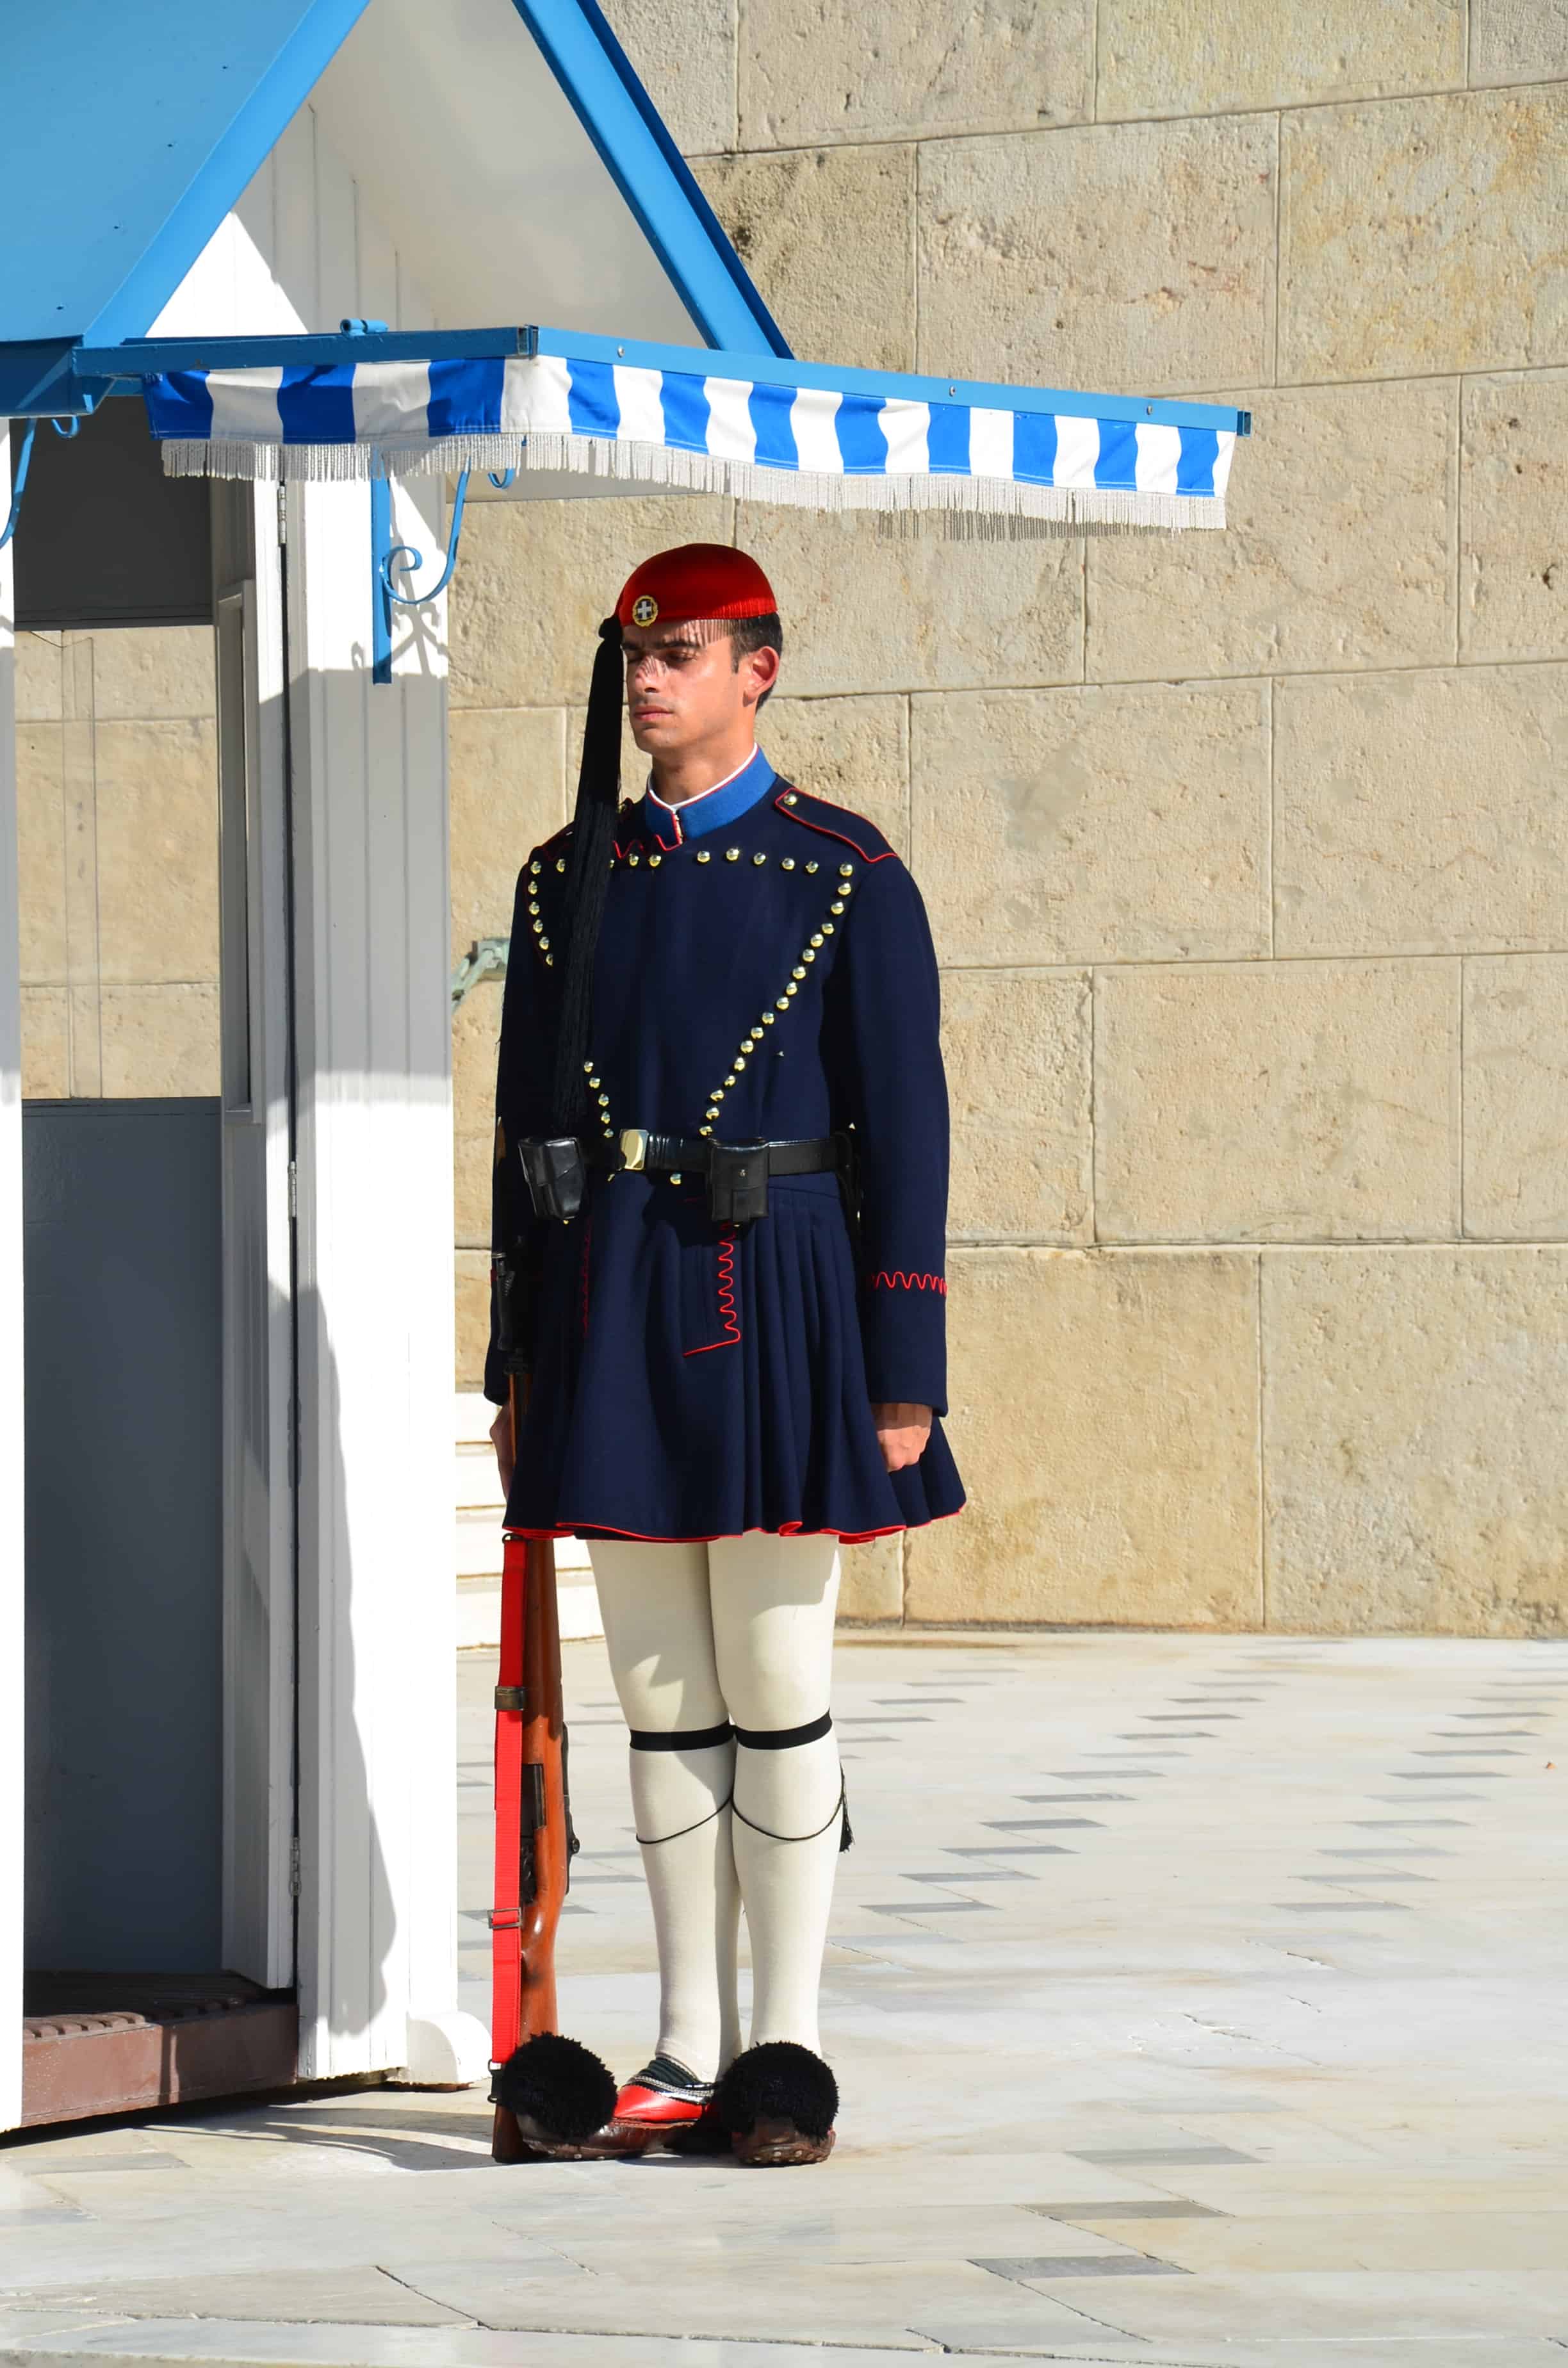 Evzone at the Tomb of the Unknown Soldier in Athens, Greece